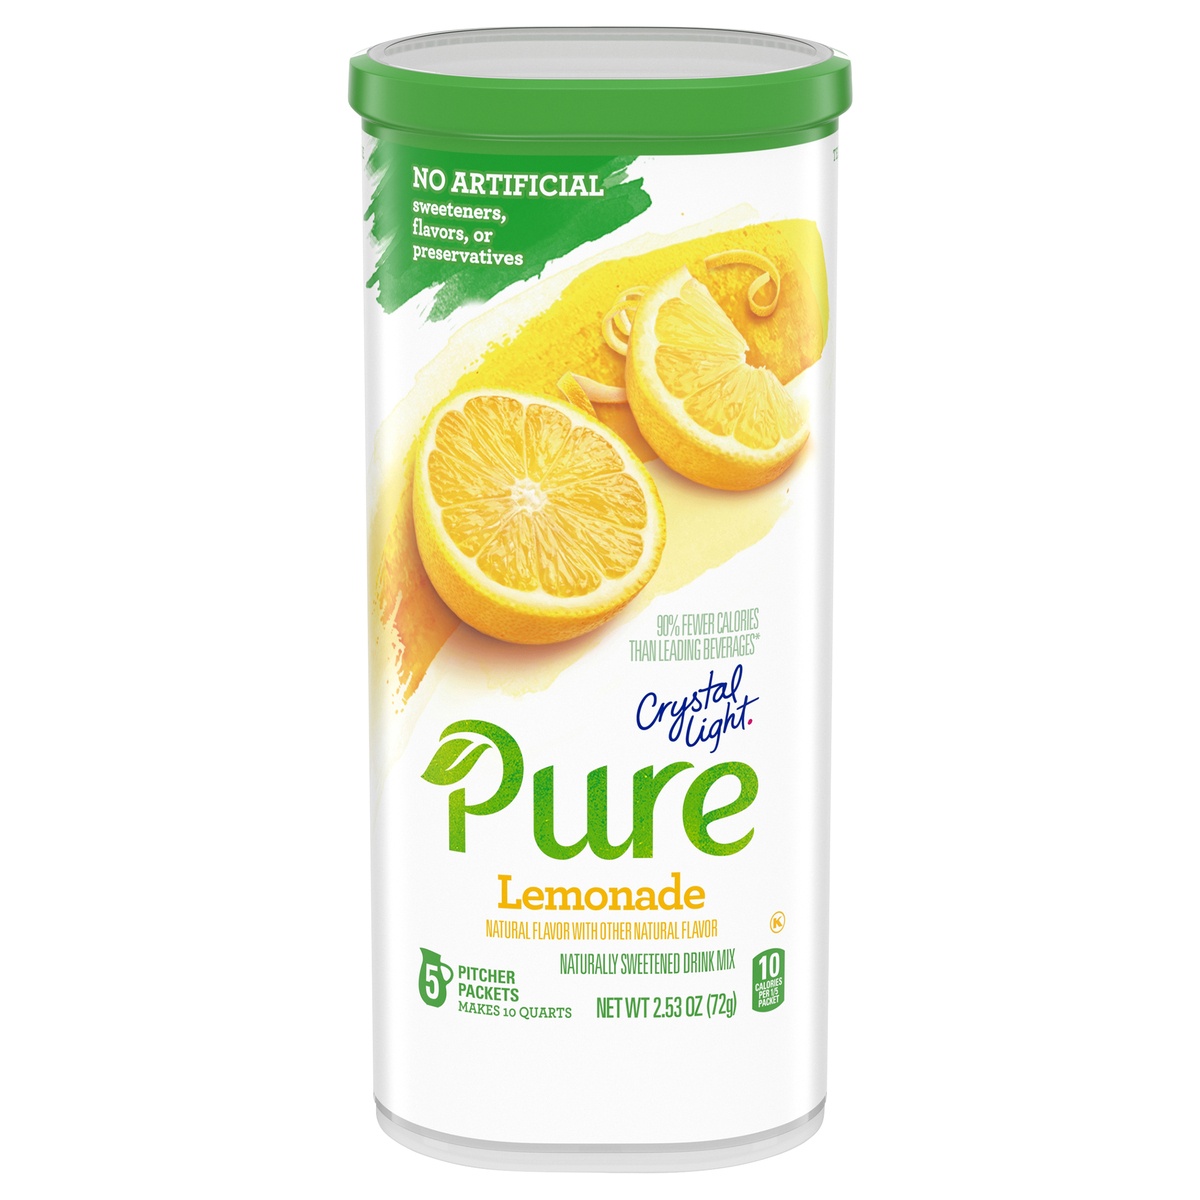 slide 11 of 11, Crystal Light Pure Lemonade Naturally Flavored Powdered Drink Mix with No Artificial Sweeteners Pitcher, 2.53 oz